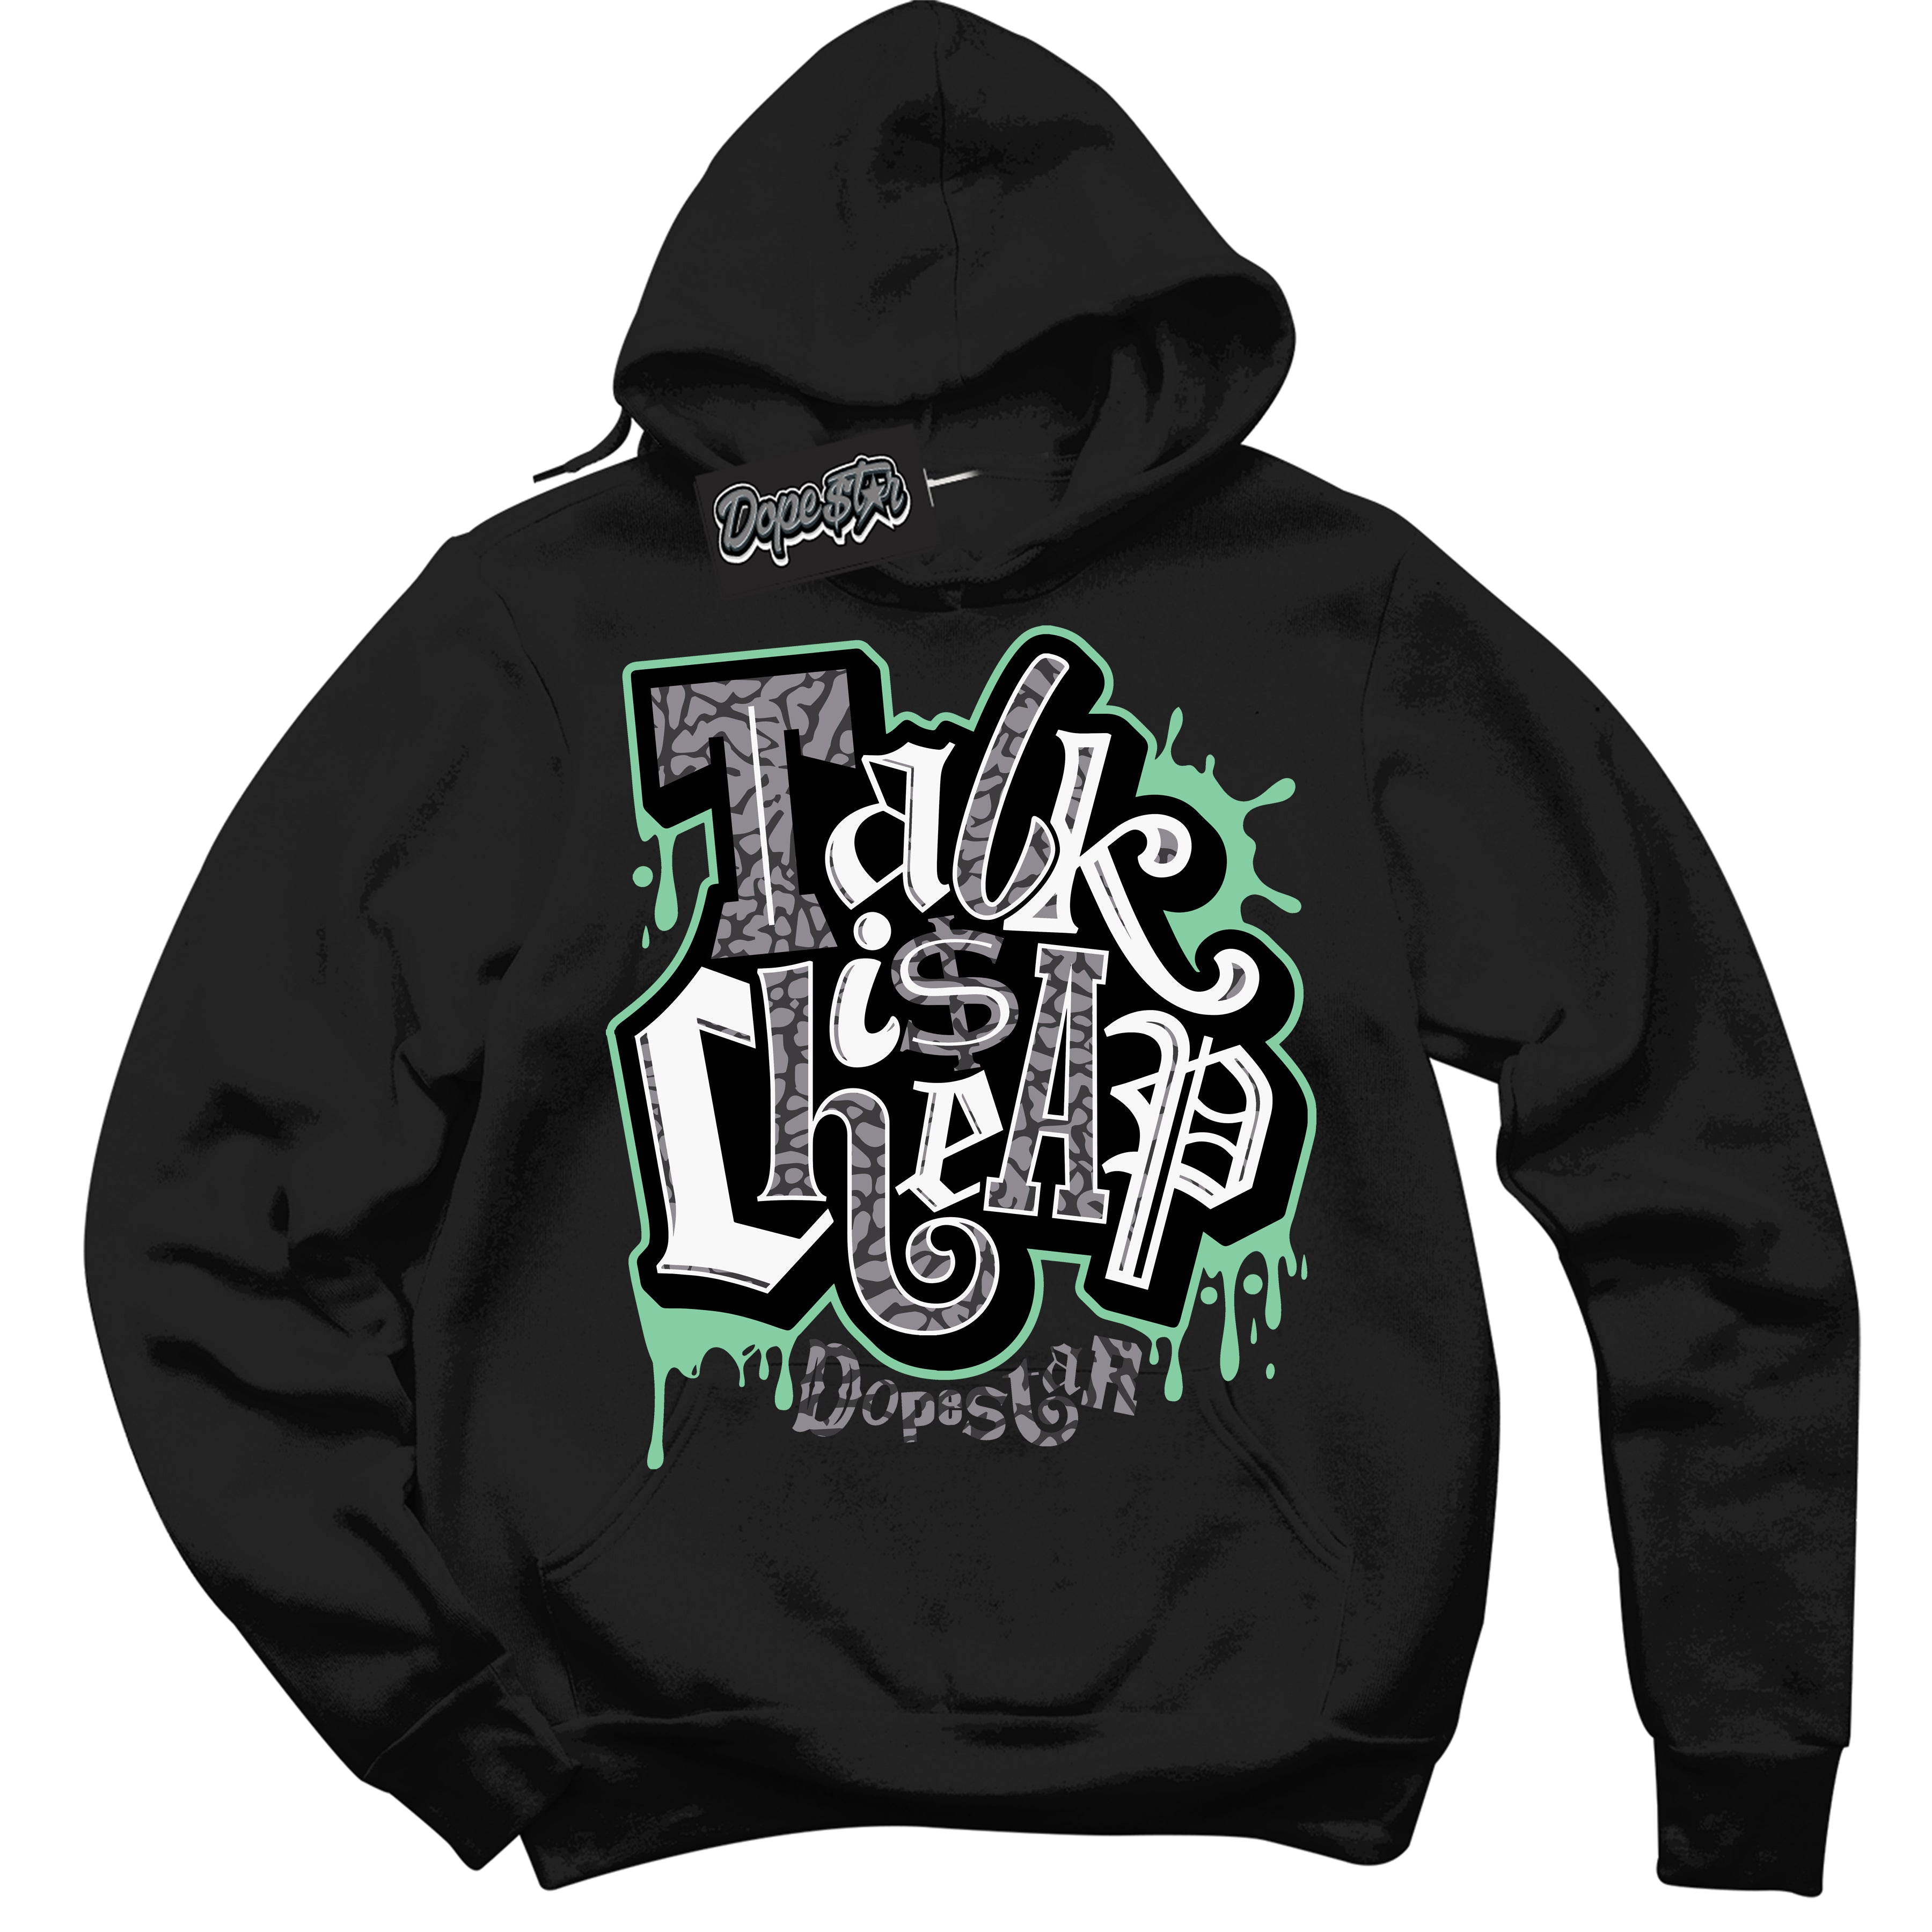 Cool Black Graphic DopeStar Hoodie with “ Talk Is Cheap “ print, that perfectly matches Green Glow 3S sneakers